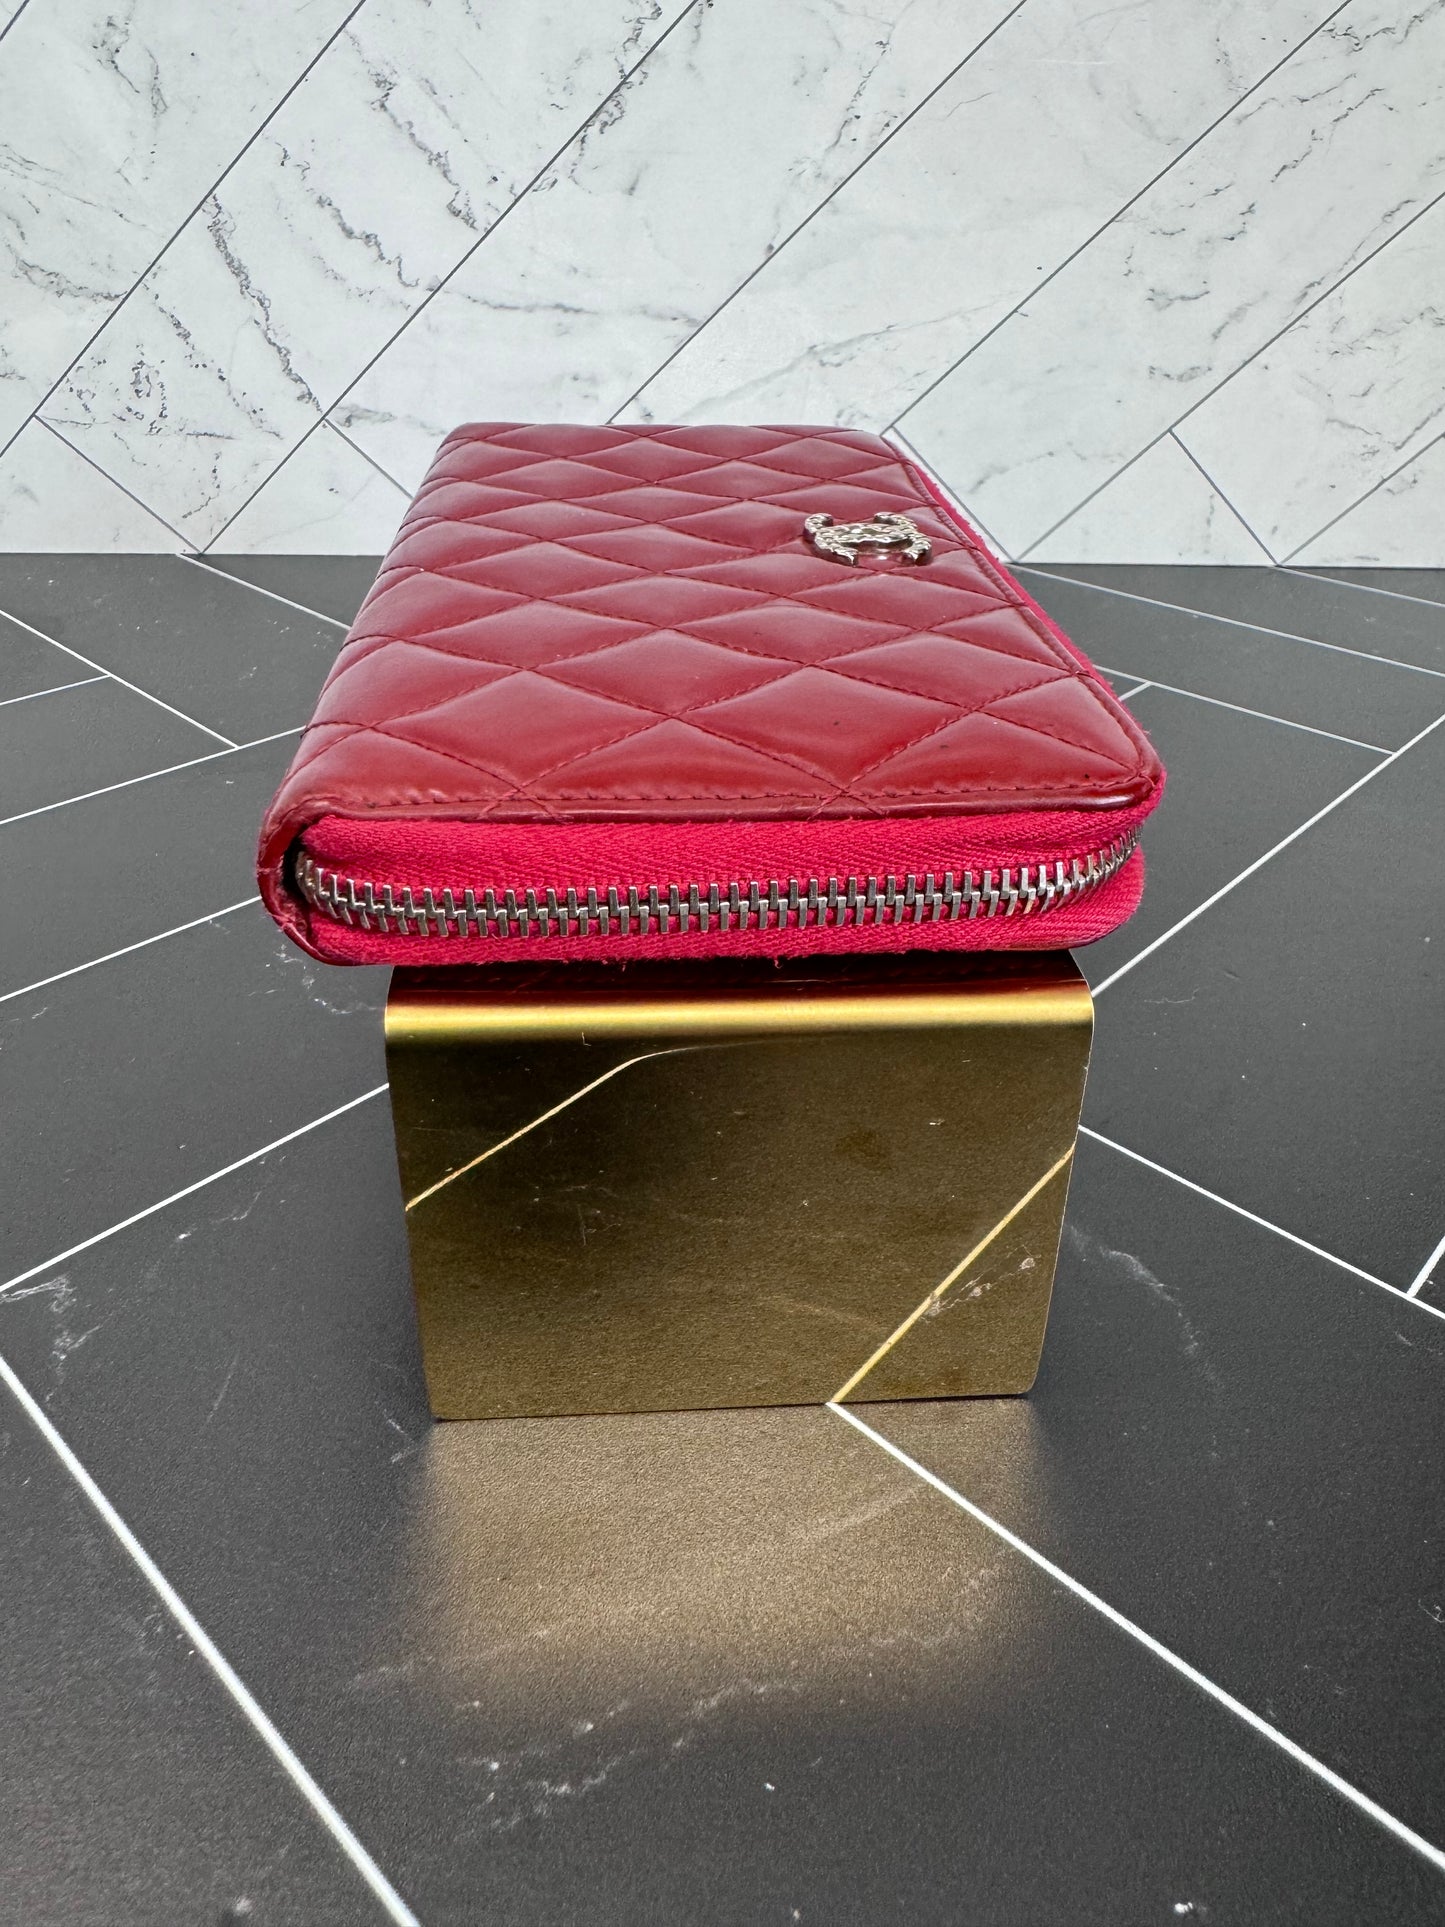 Chanel Red Patent Leather Quilted Zippy Wallet